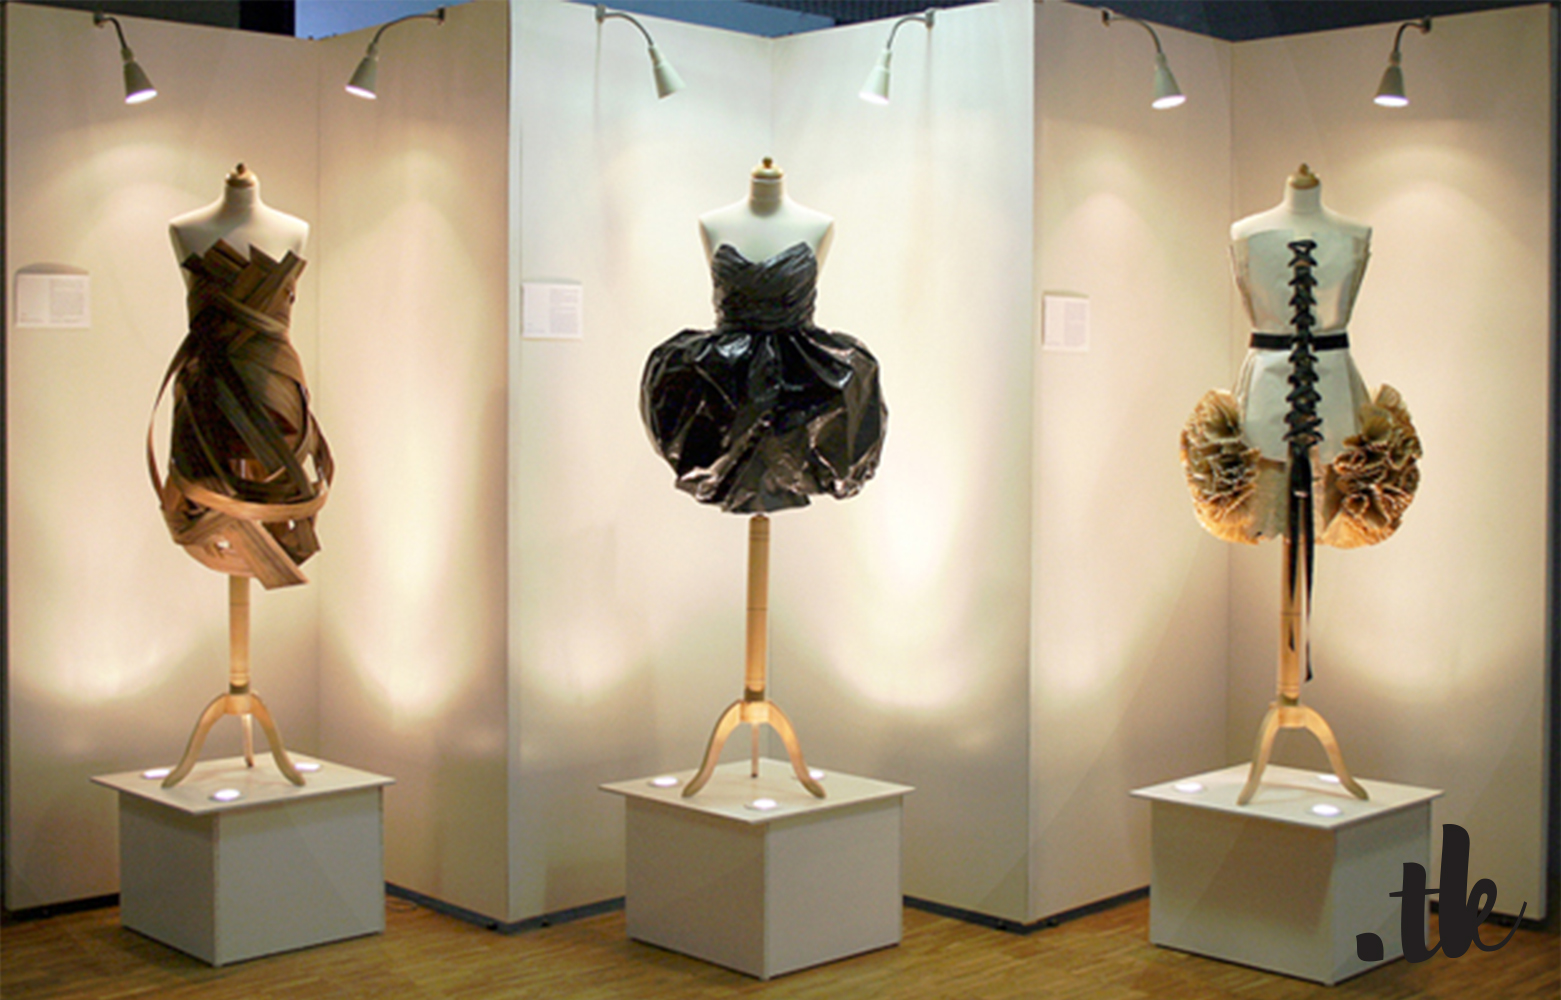 Dresses made from plastic bags, veneer and old books, experimental fashion design, sculptures by tanja kaiser